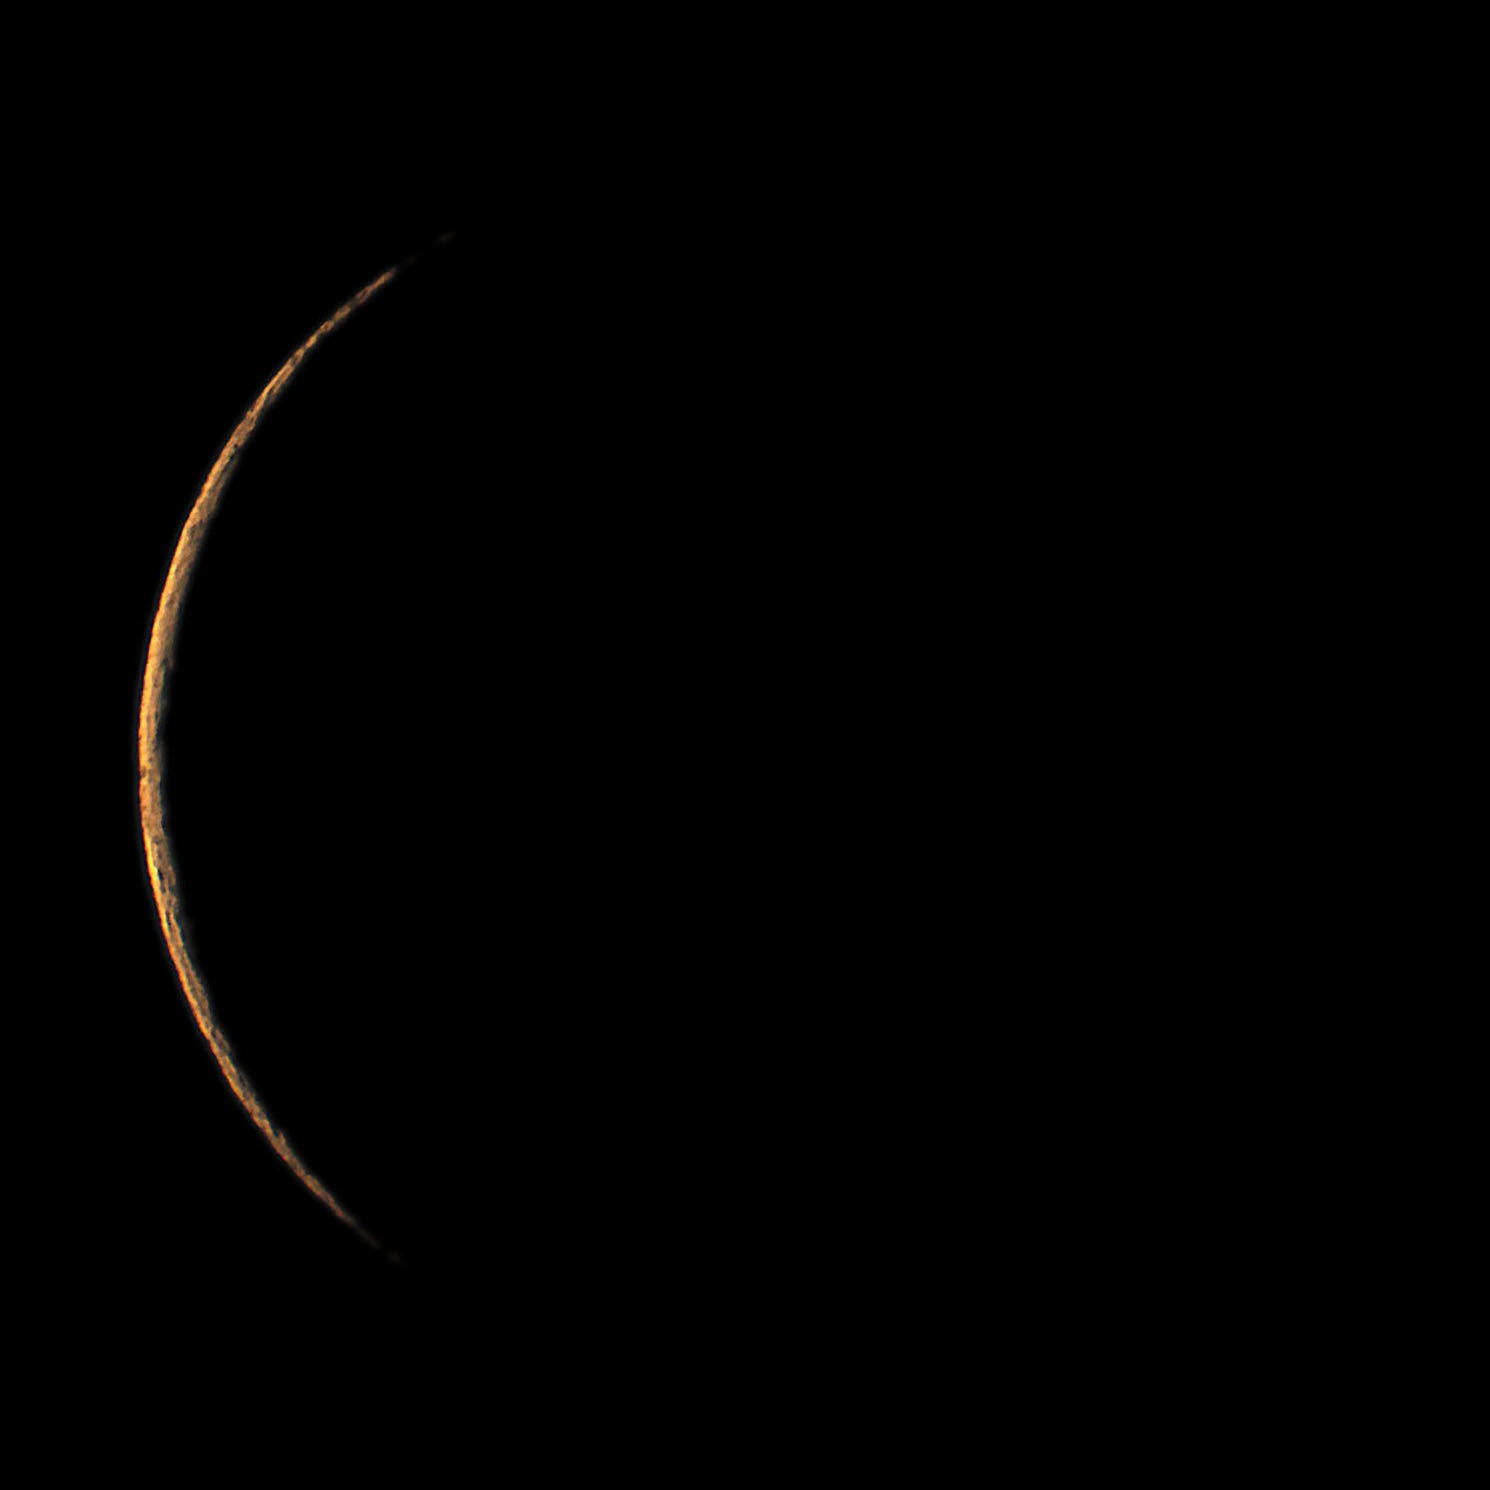 28 Old Crescent Moon in the Sun's last grasp 140725 @ not so bad ...